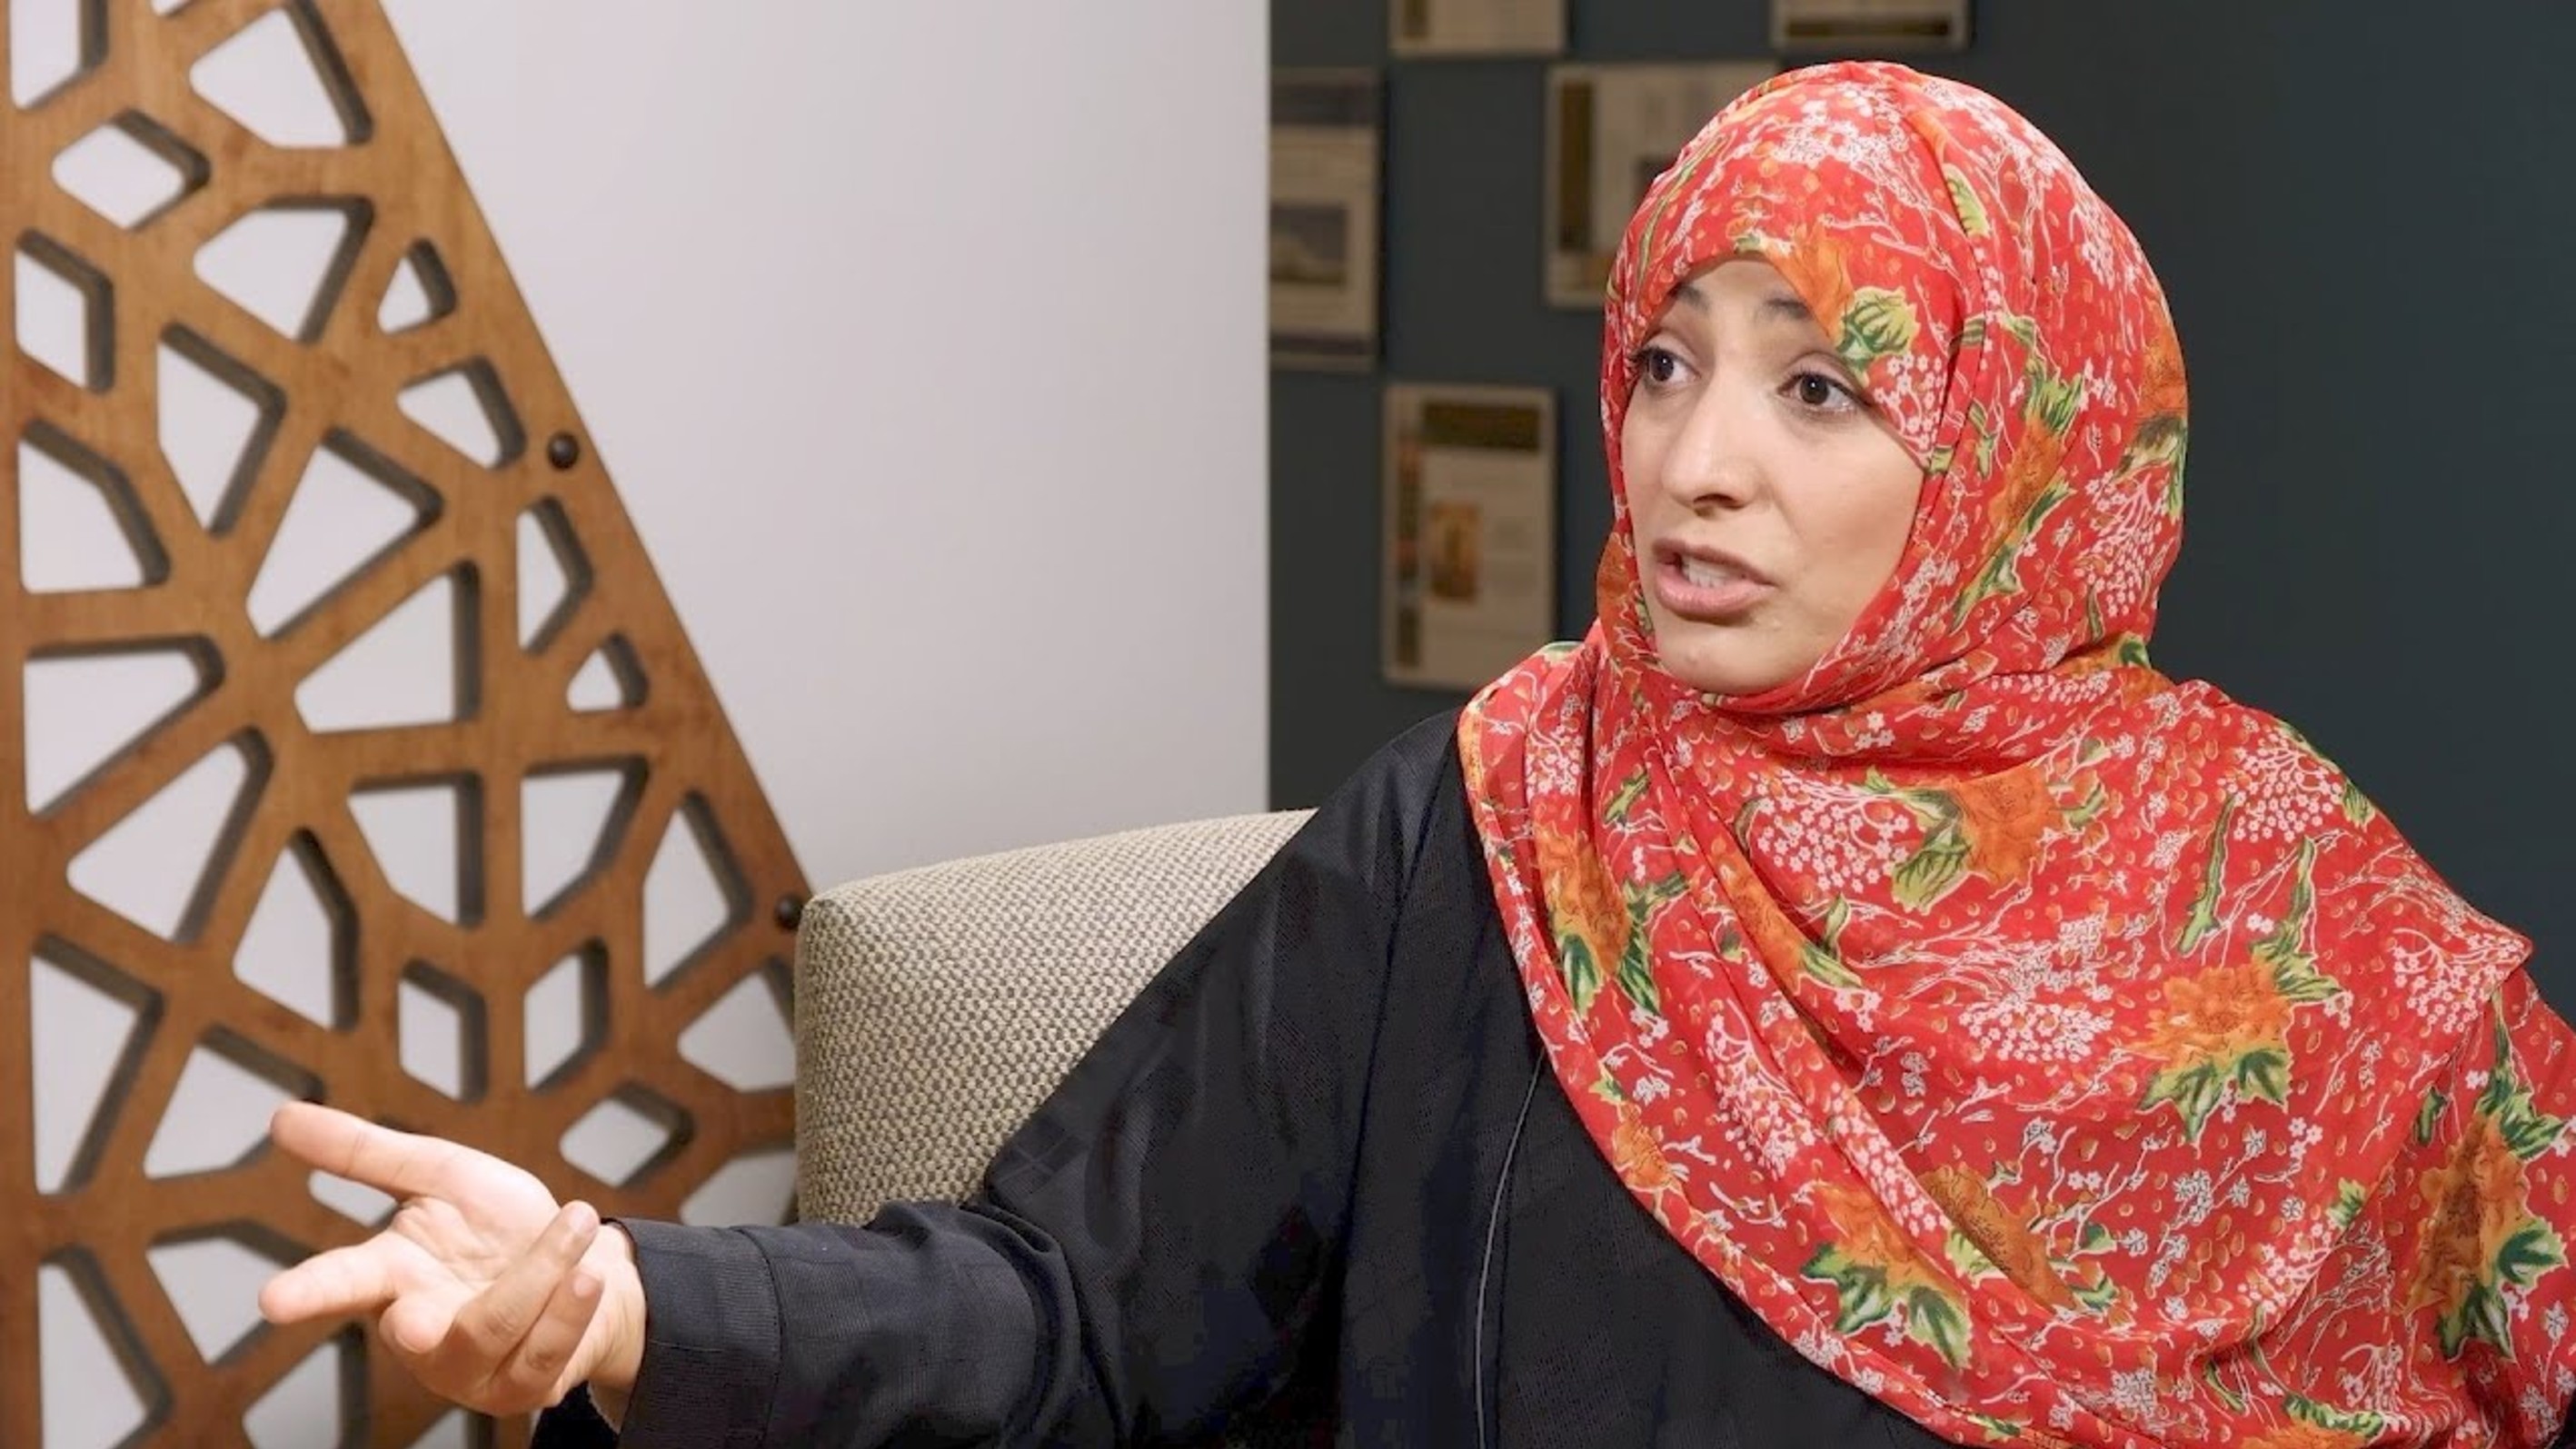 Tawakkol Karman, the 2011 Nobel Peace Prize laureate, spoke with JMEPP’s Blaire Byg about women’s role in the Arab Spring, the ongoing war in Yemen, and the future of her country